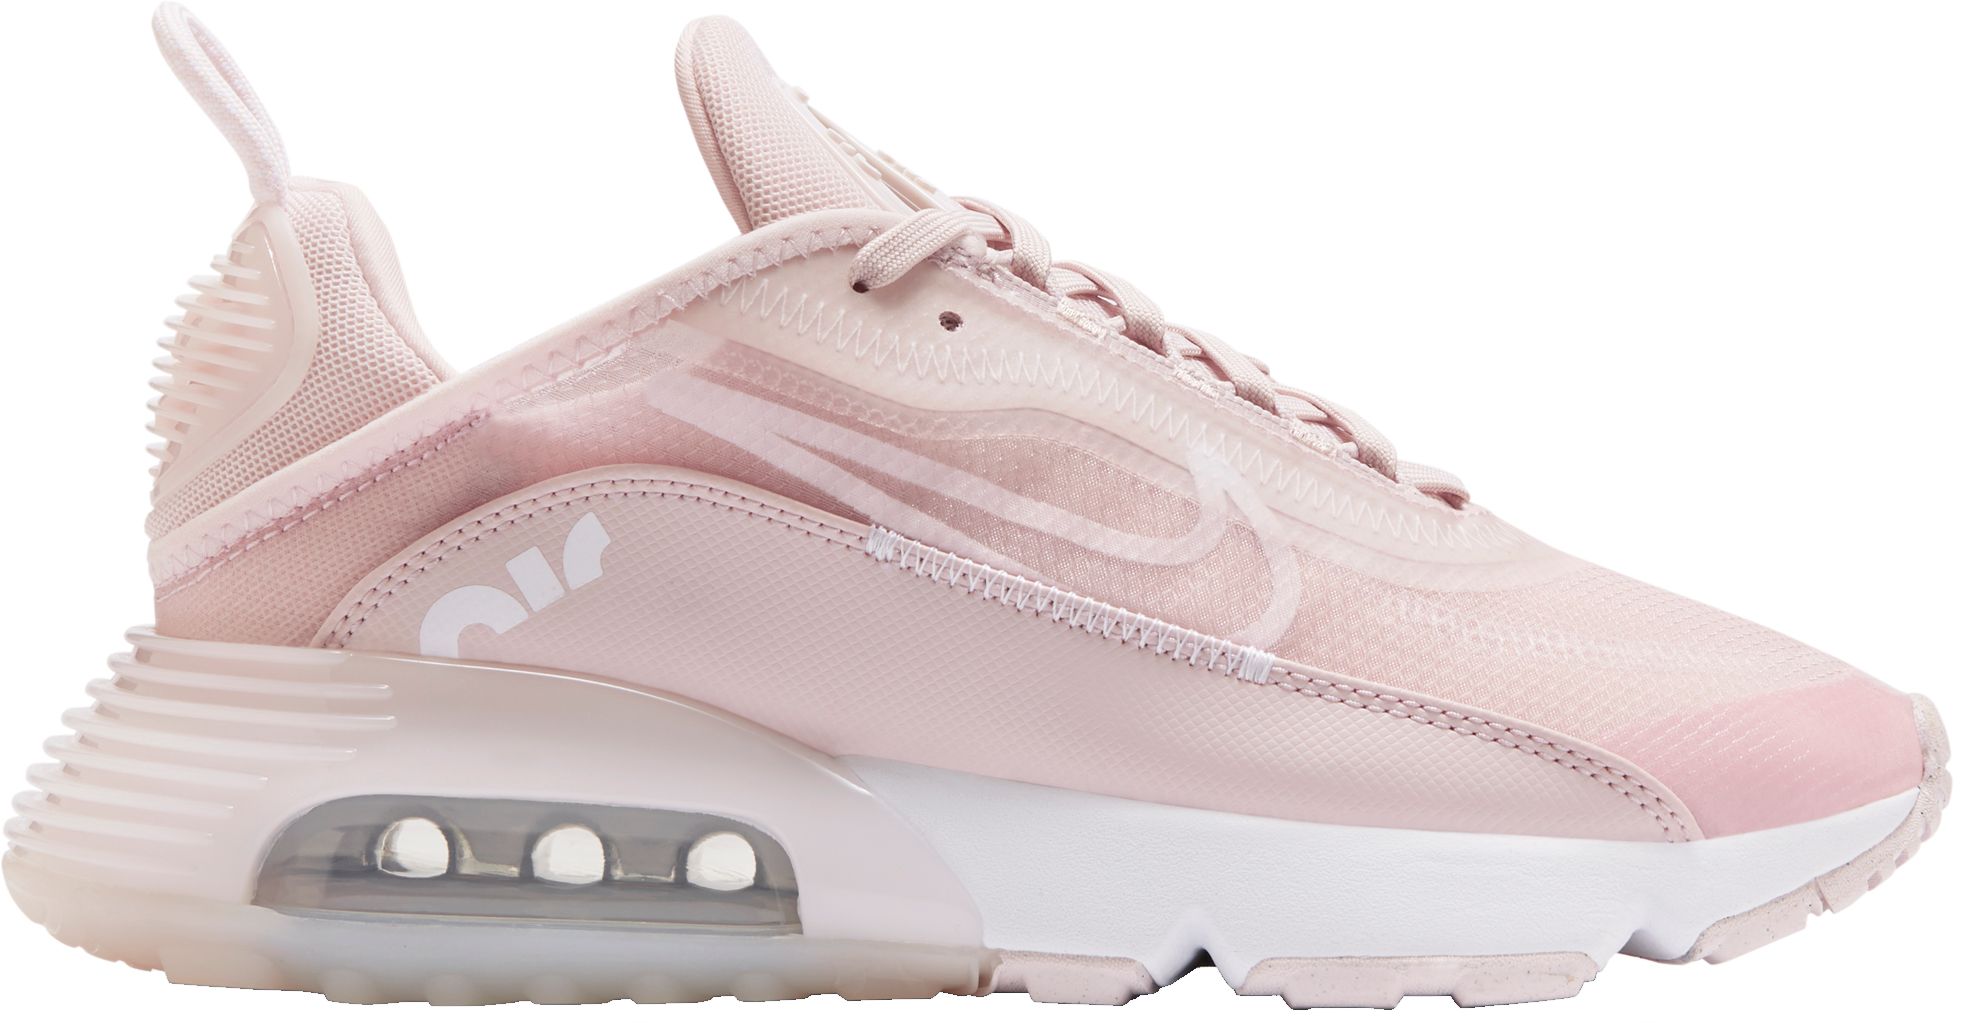 Women's Nike Air Max 2090 Shoes| Best 